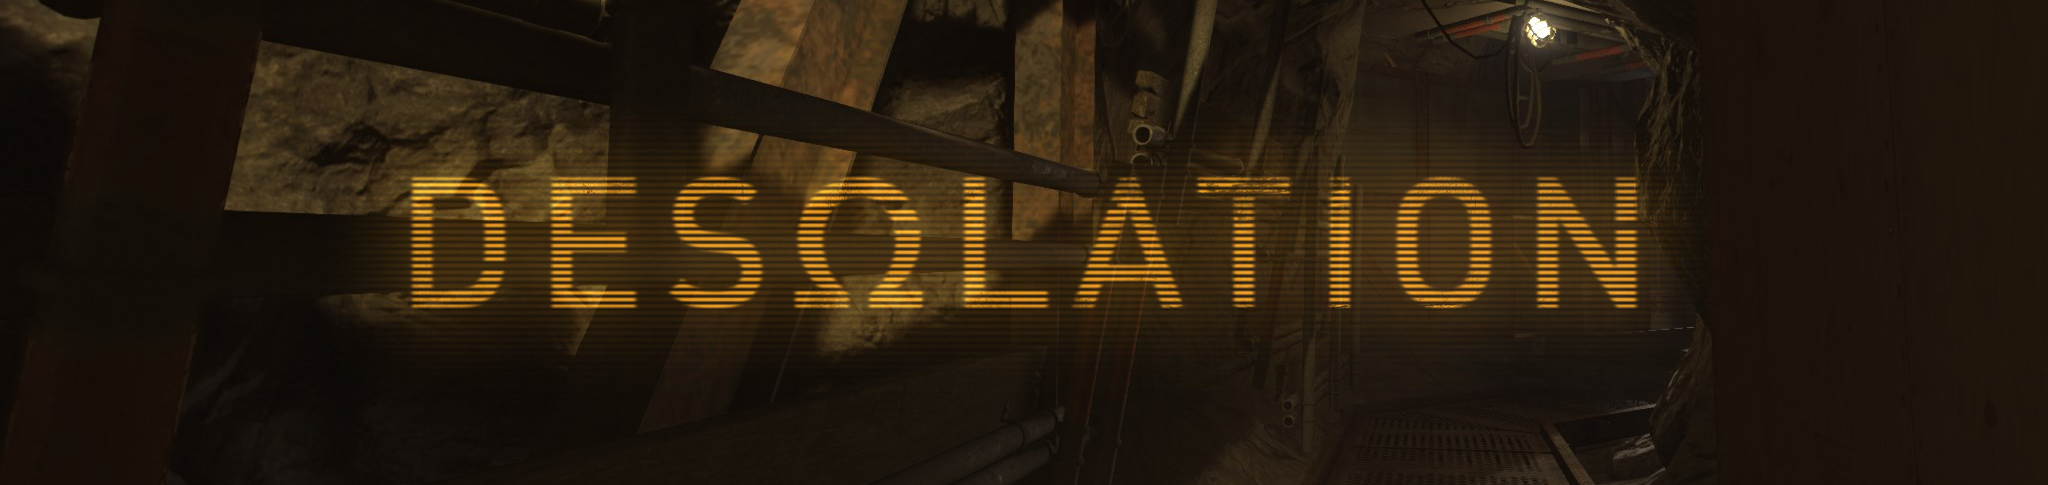 Gameplay teaser trailer for the upcoming Portal 2: Desolation Mod